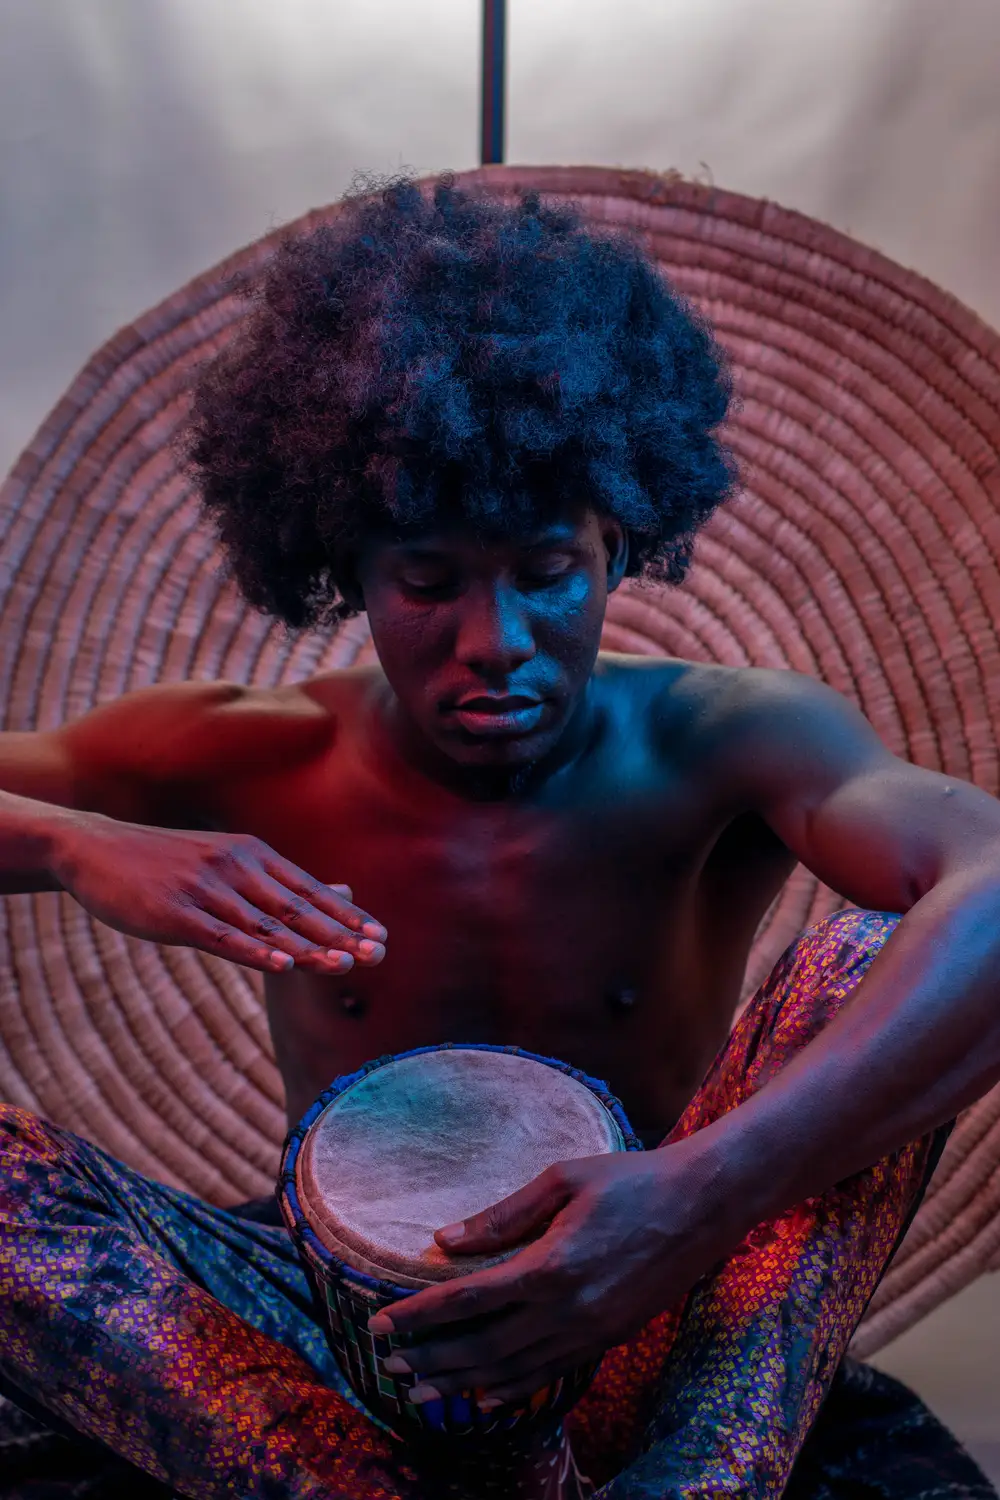 model on afro hairstyle plays his drum